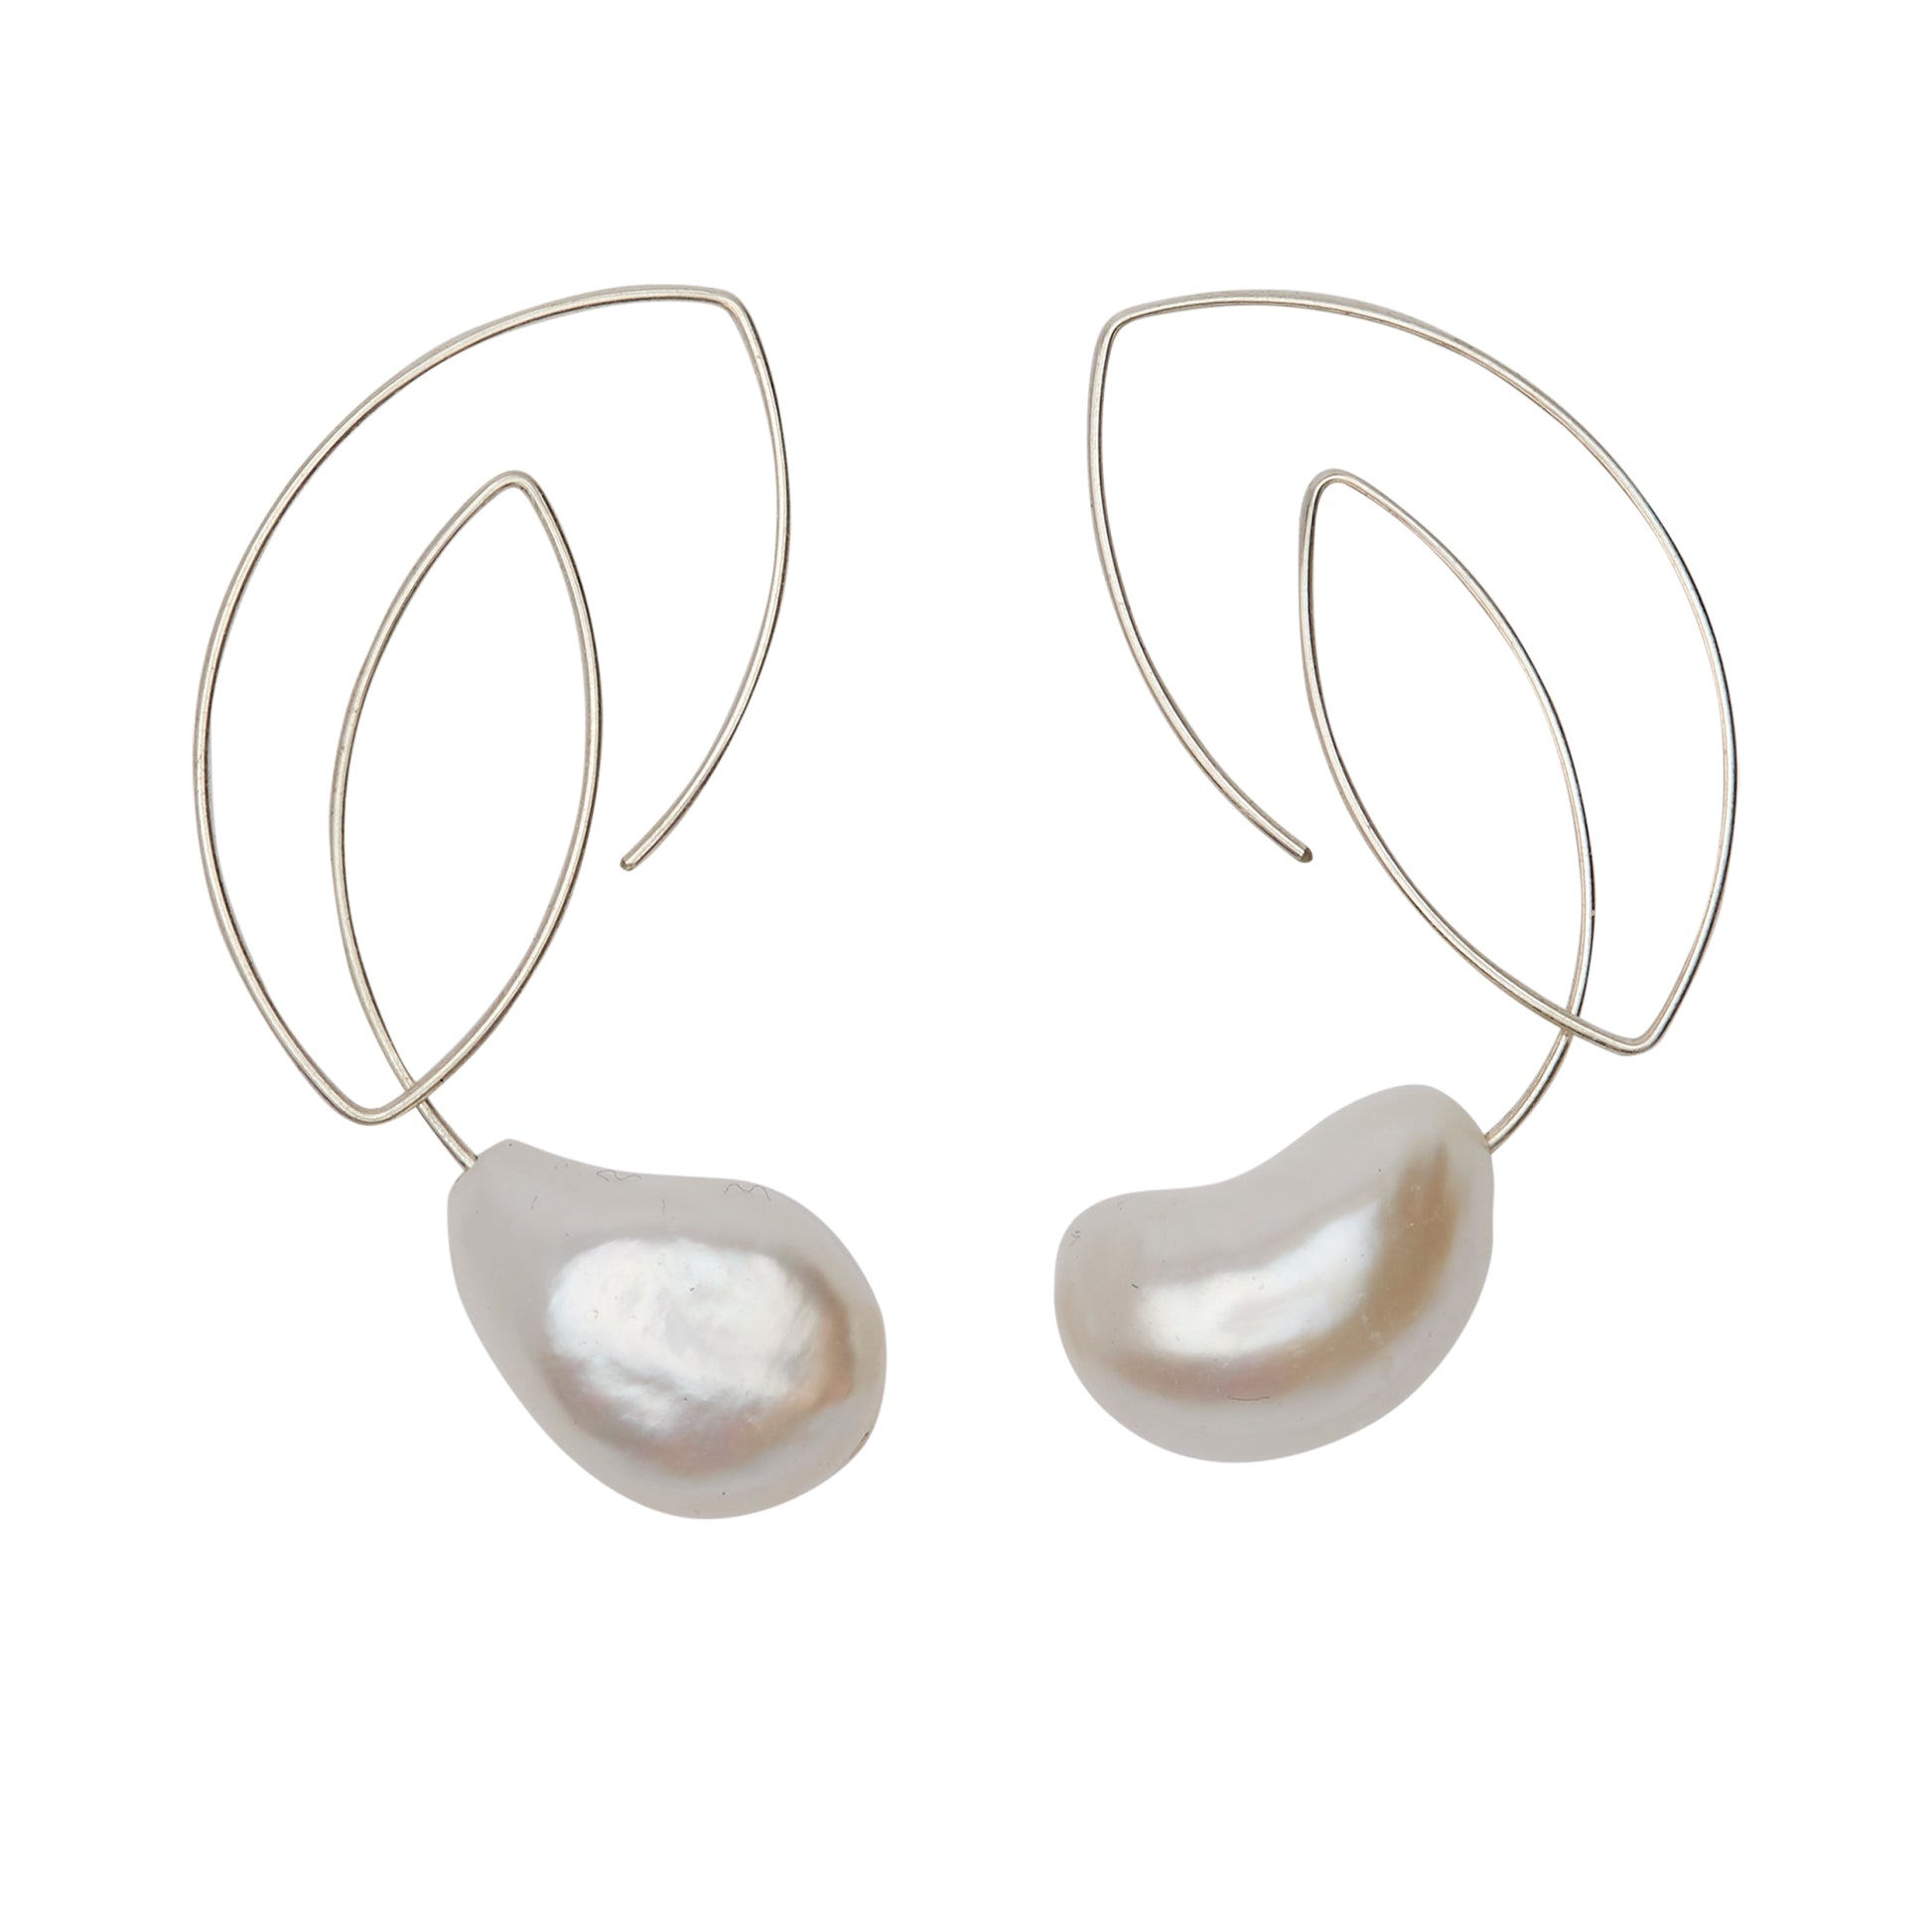 Cubist Earrings with Large White Fresh Water Pearl Baroque Drop